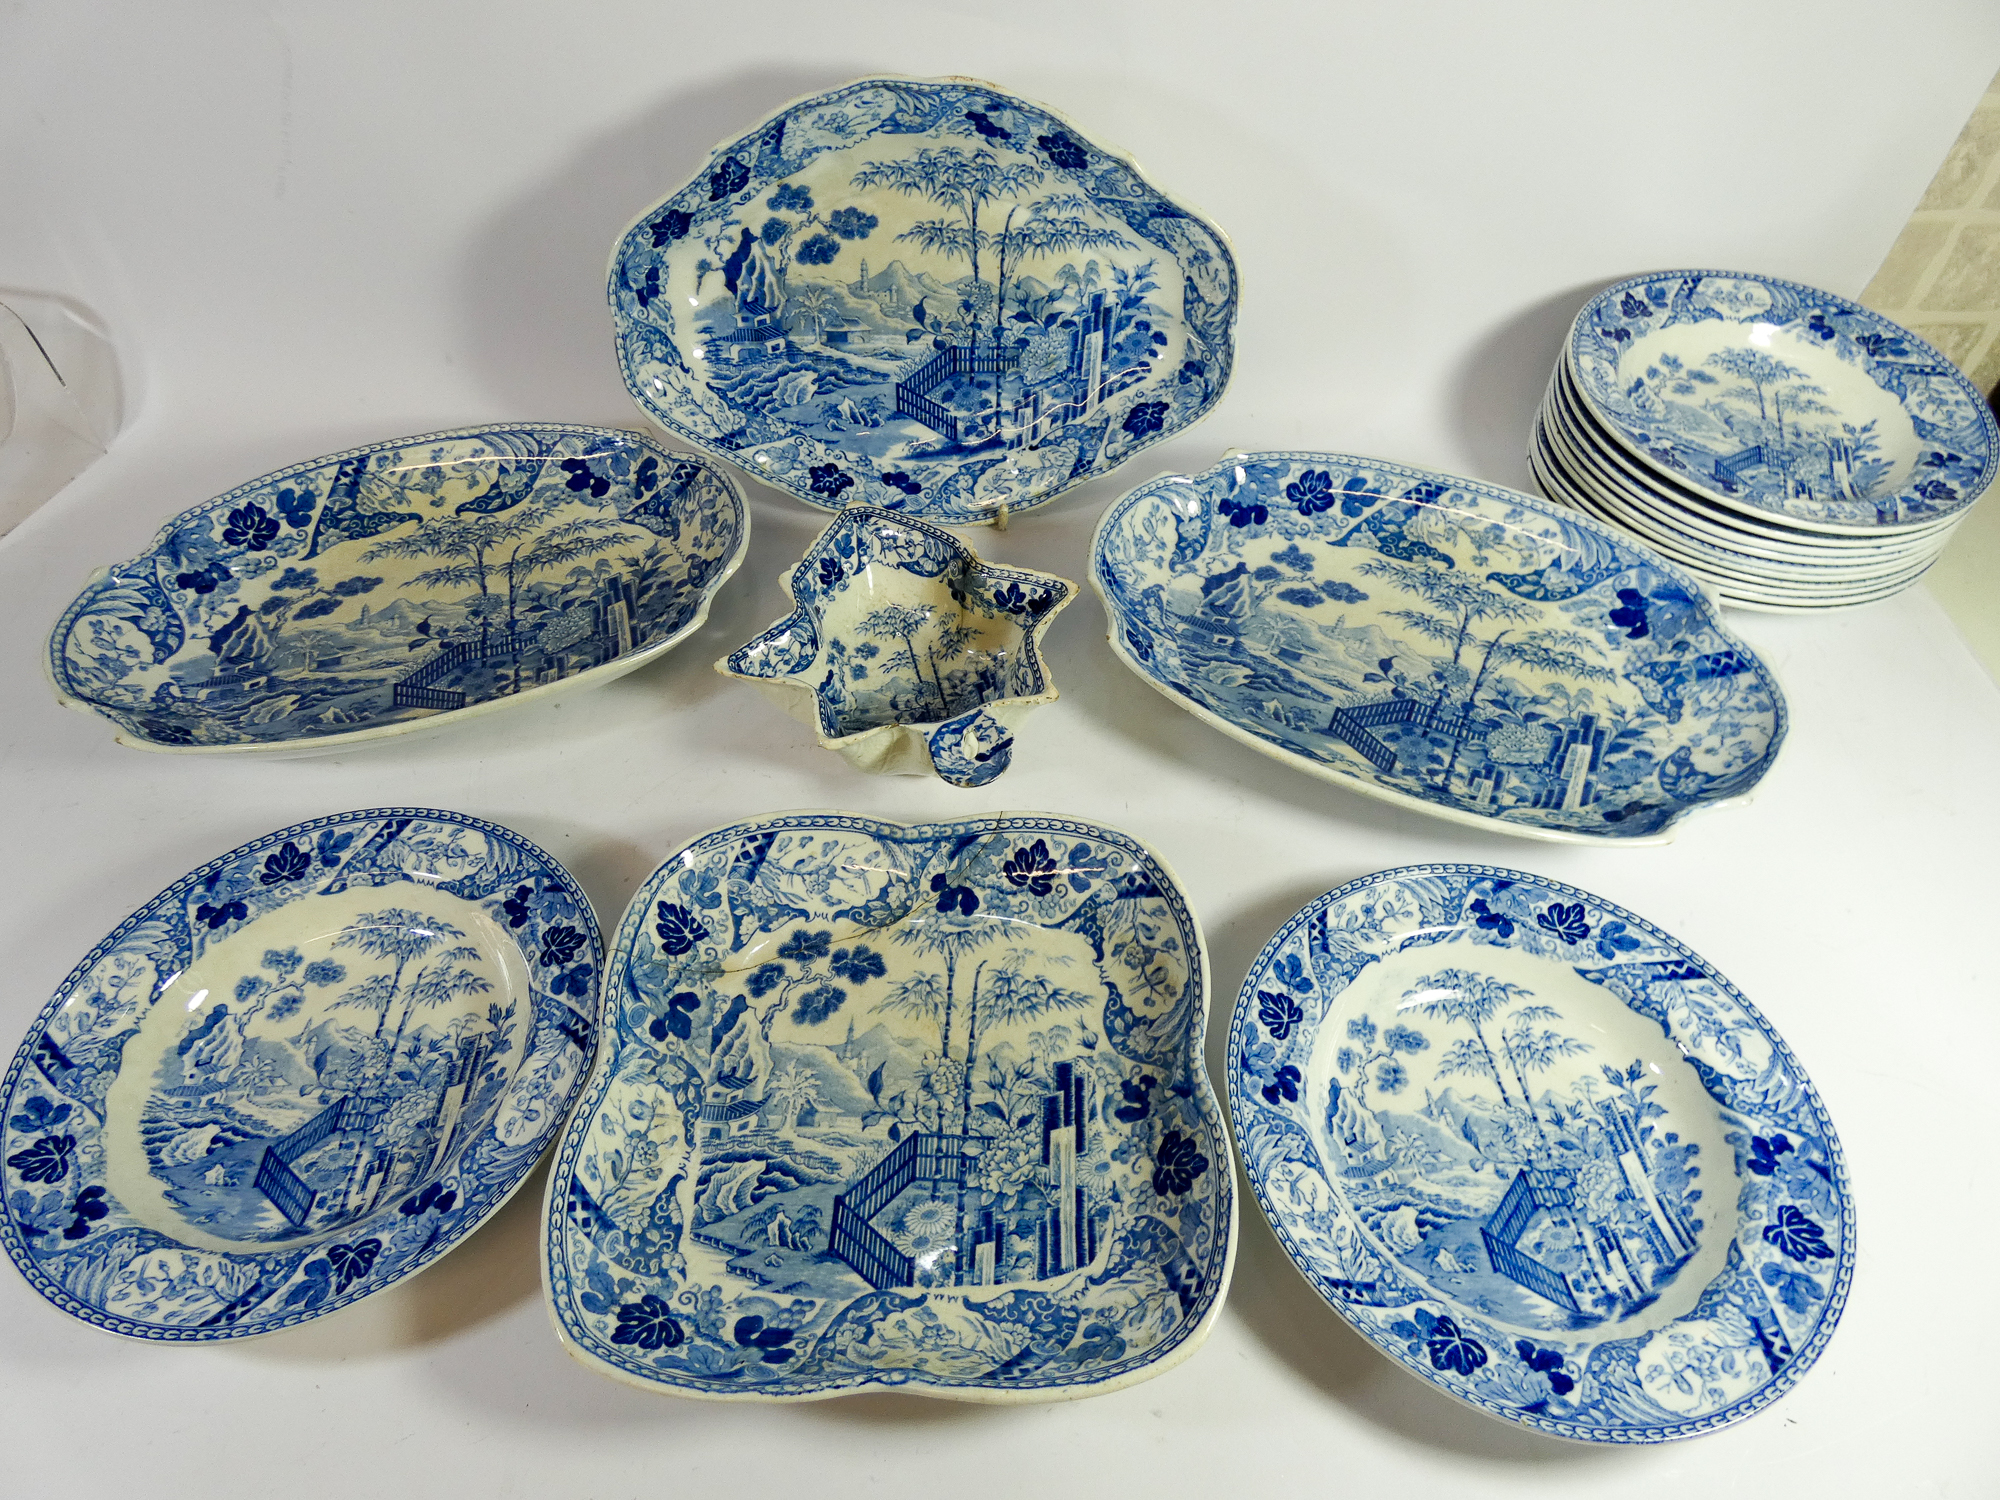 A 19th Century Wedgwood Chinese garden or bamboo and fence design blue and white part service,